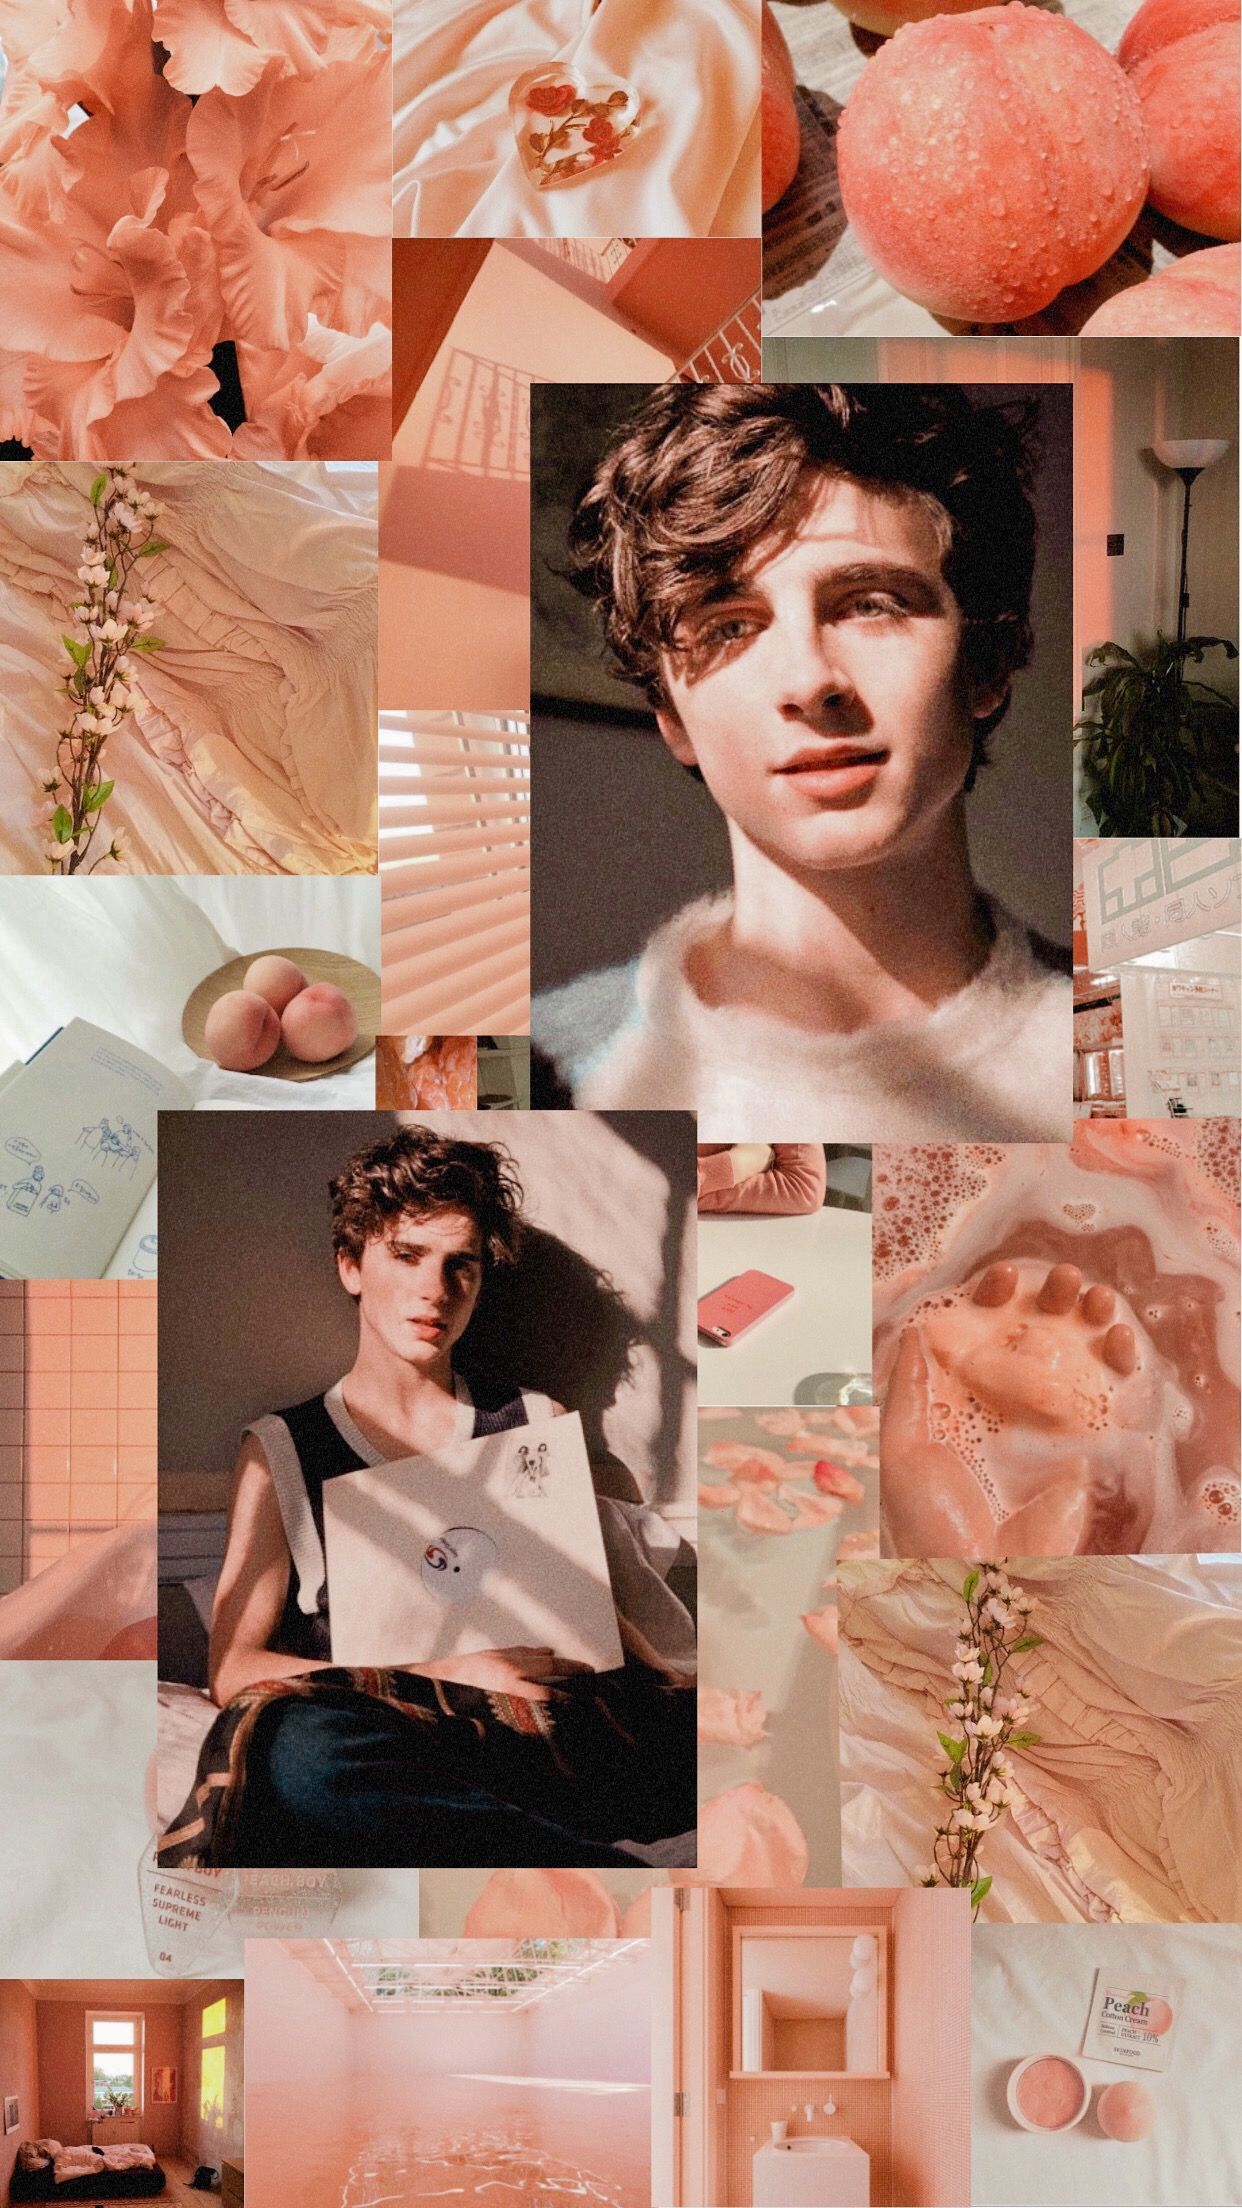 Collage of photos of the singer Shawn Mendes, aesthetic background - Timothee Chalamet